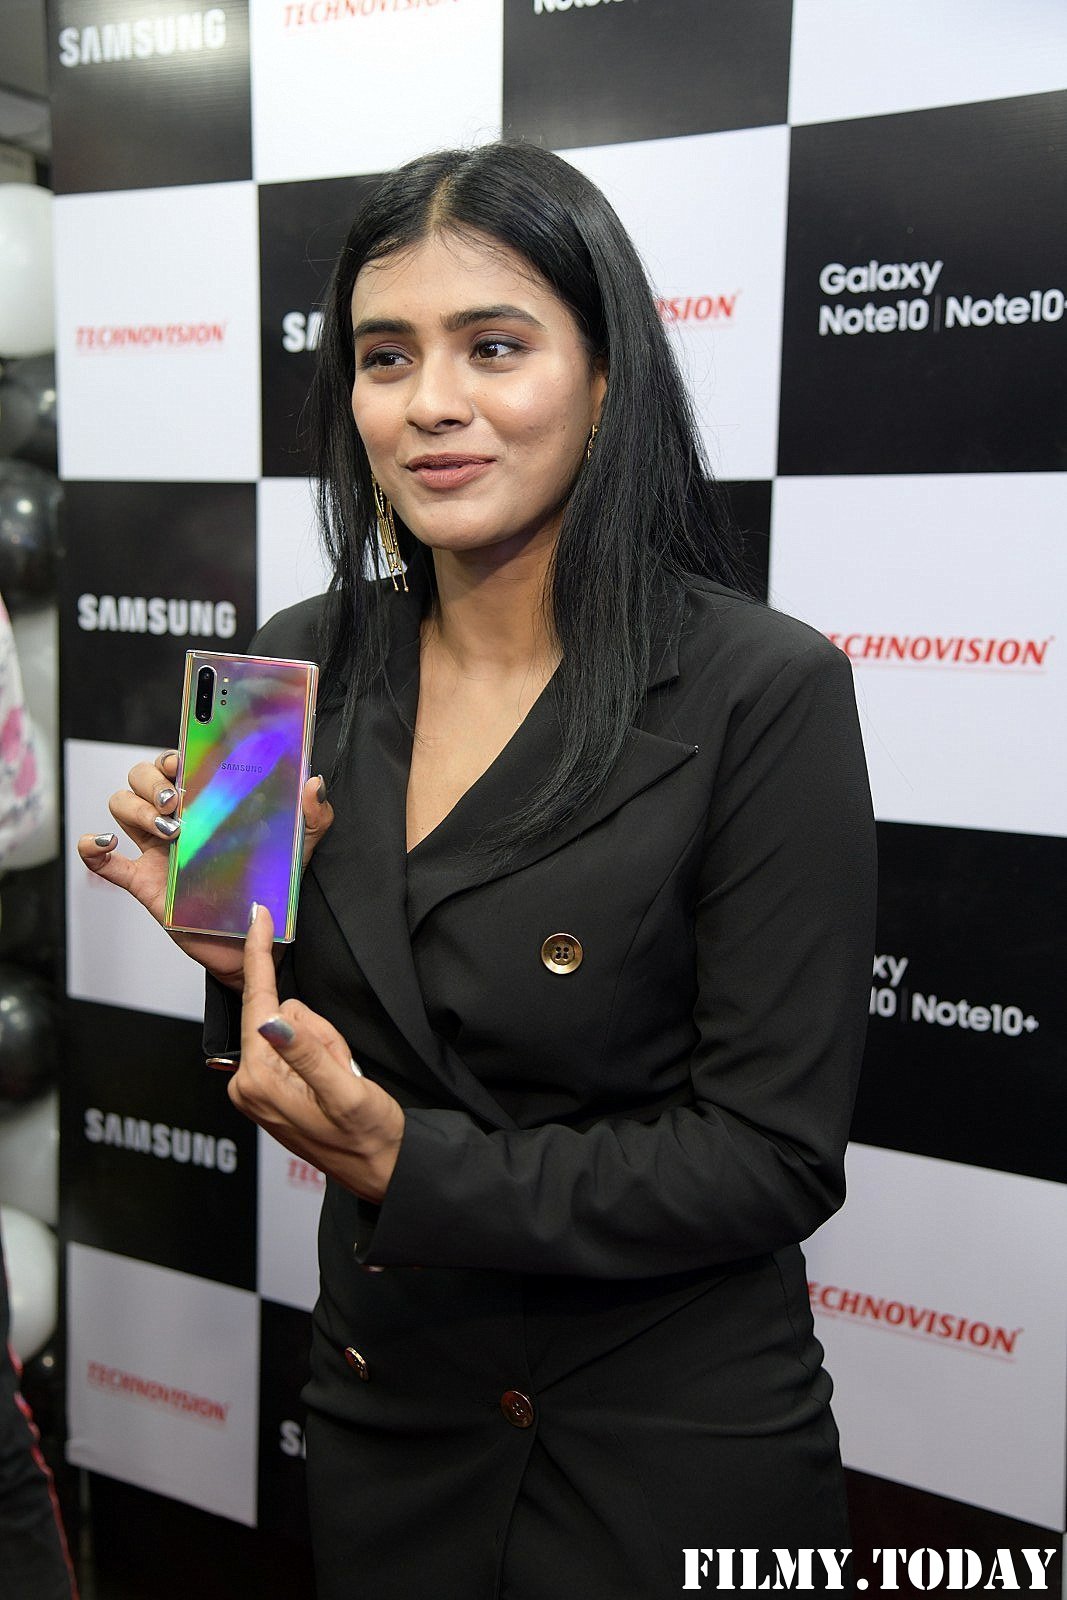 Hebah Patel Launches Samsung Galaxy Note 10 At Technovision Mobile Store Photos | Picture 1679524